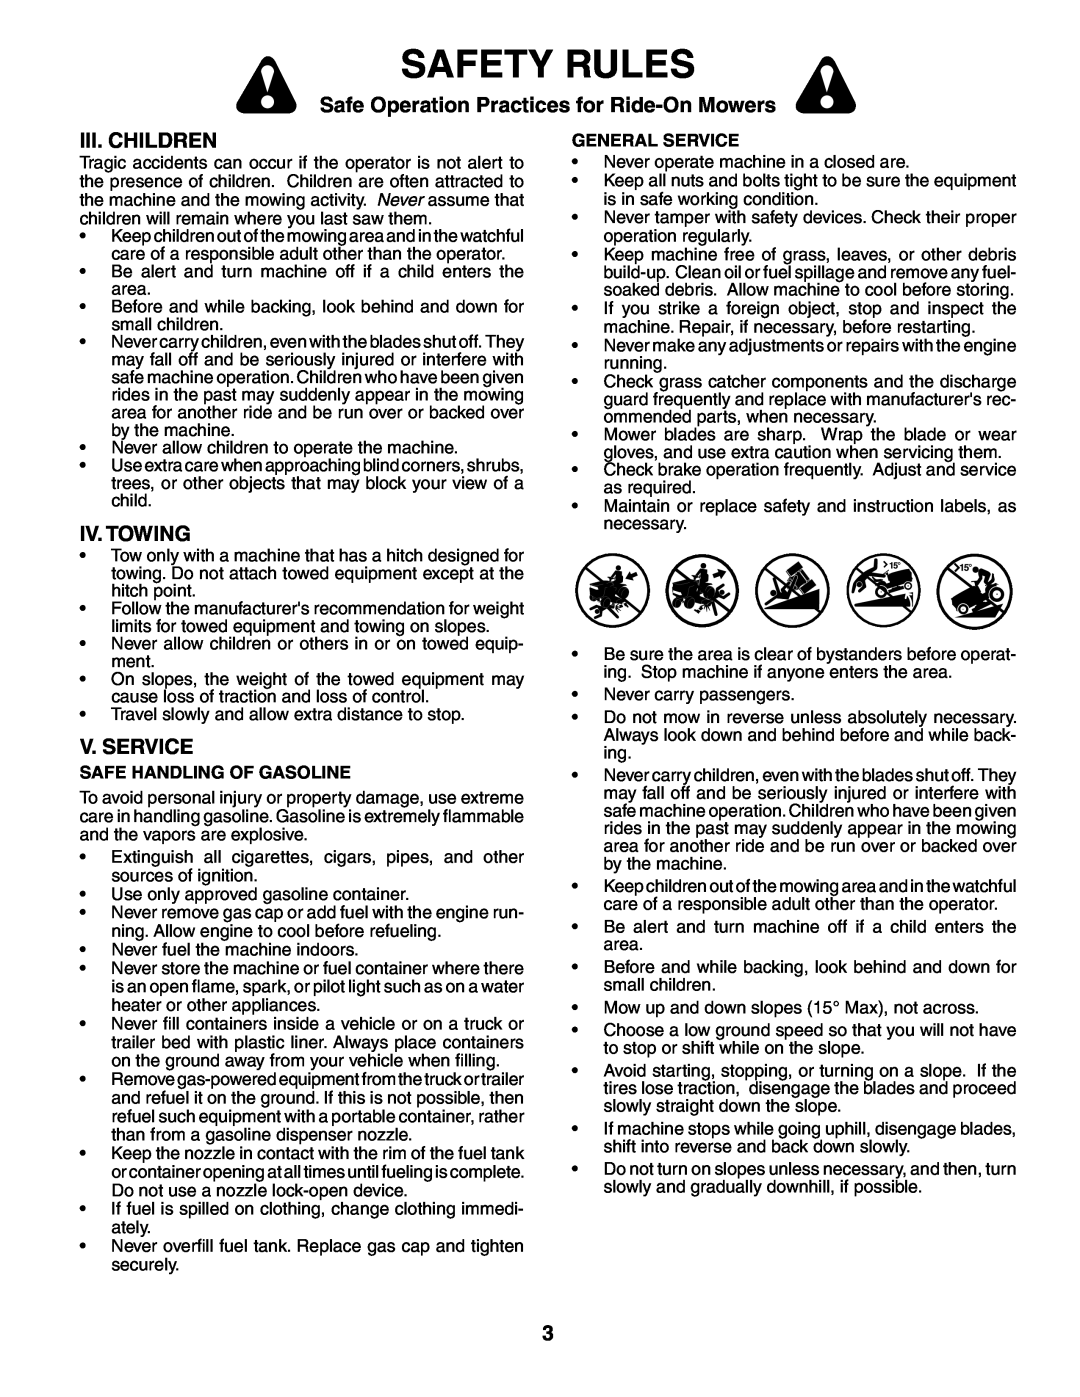 Poulan 195032 manual Iii. Children, Iv. Towing, V. Service, Safety Rules, Safe Operation Practices for Ride-On Mowers 